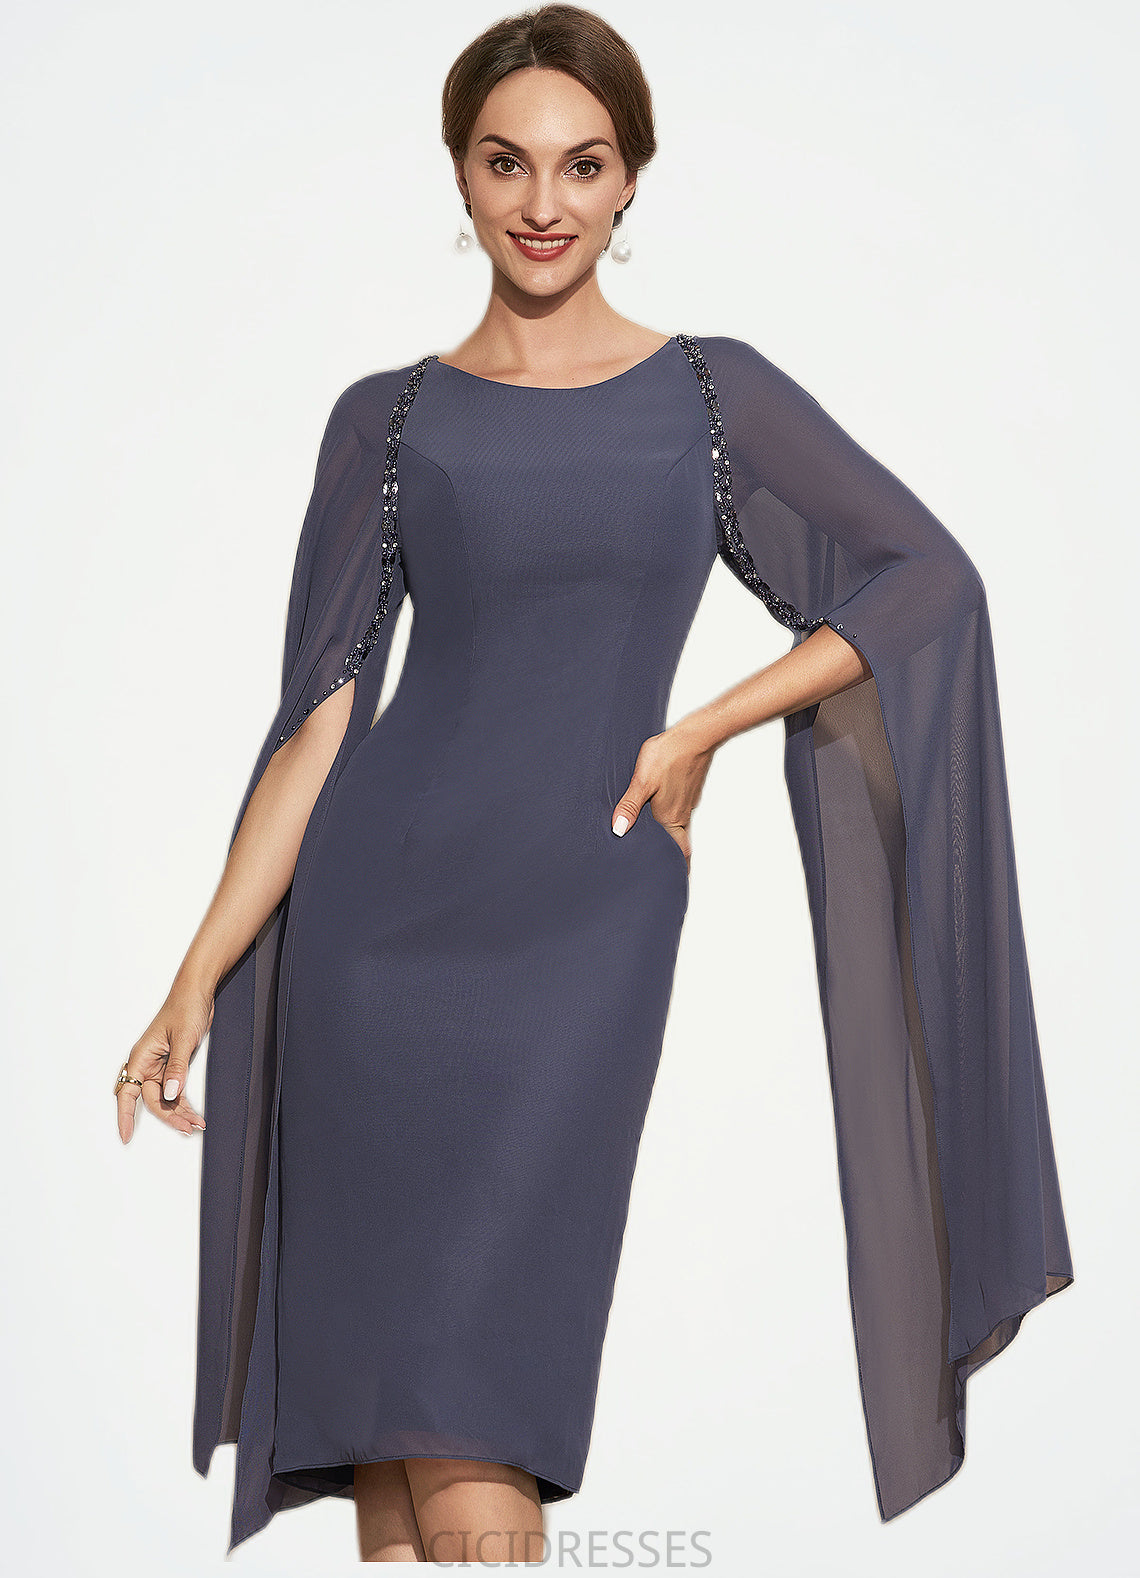 Lily Sheath/Column Scoop Neck Knee-Length Chiffon Mother of the Bride Dress With Beading CIC8126P0014969